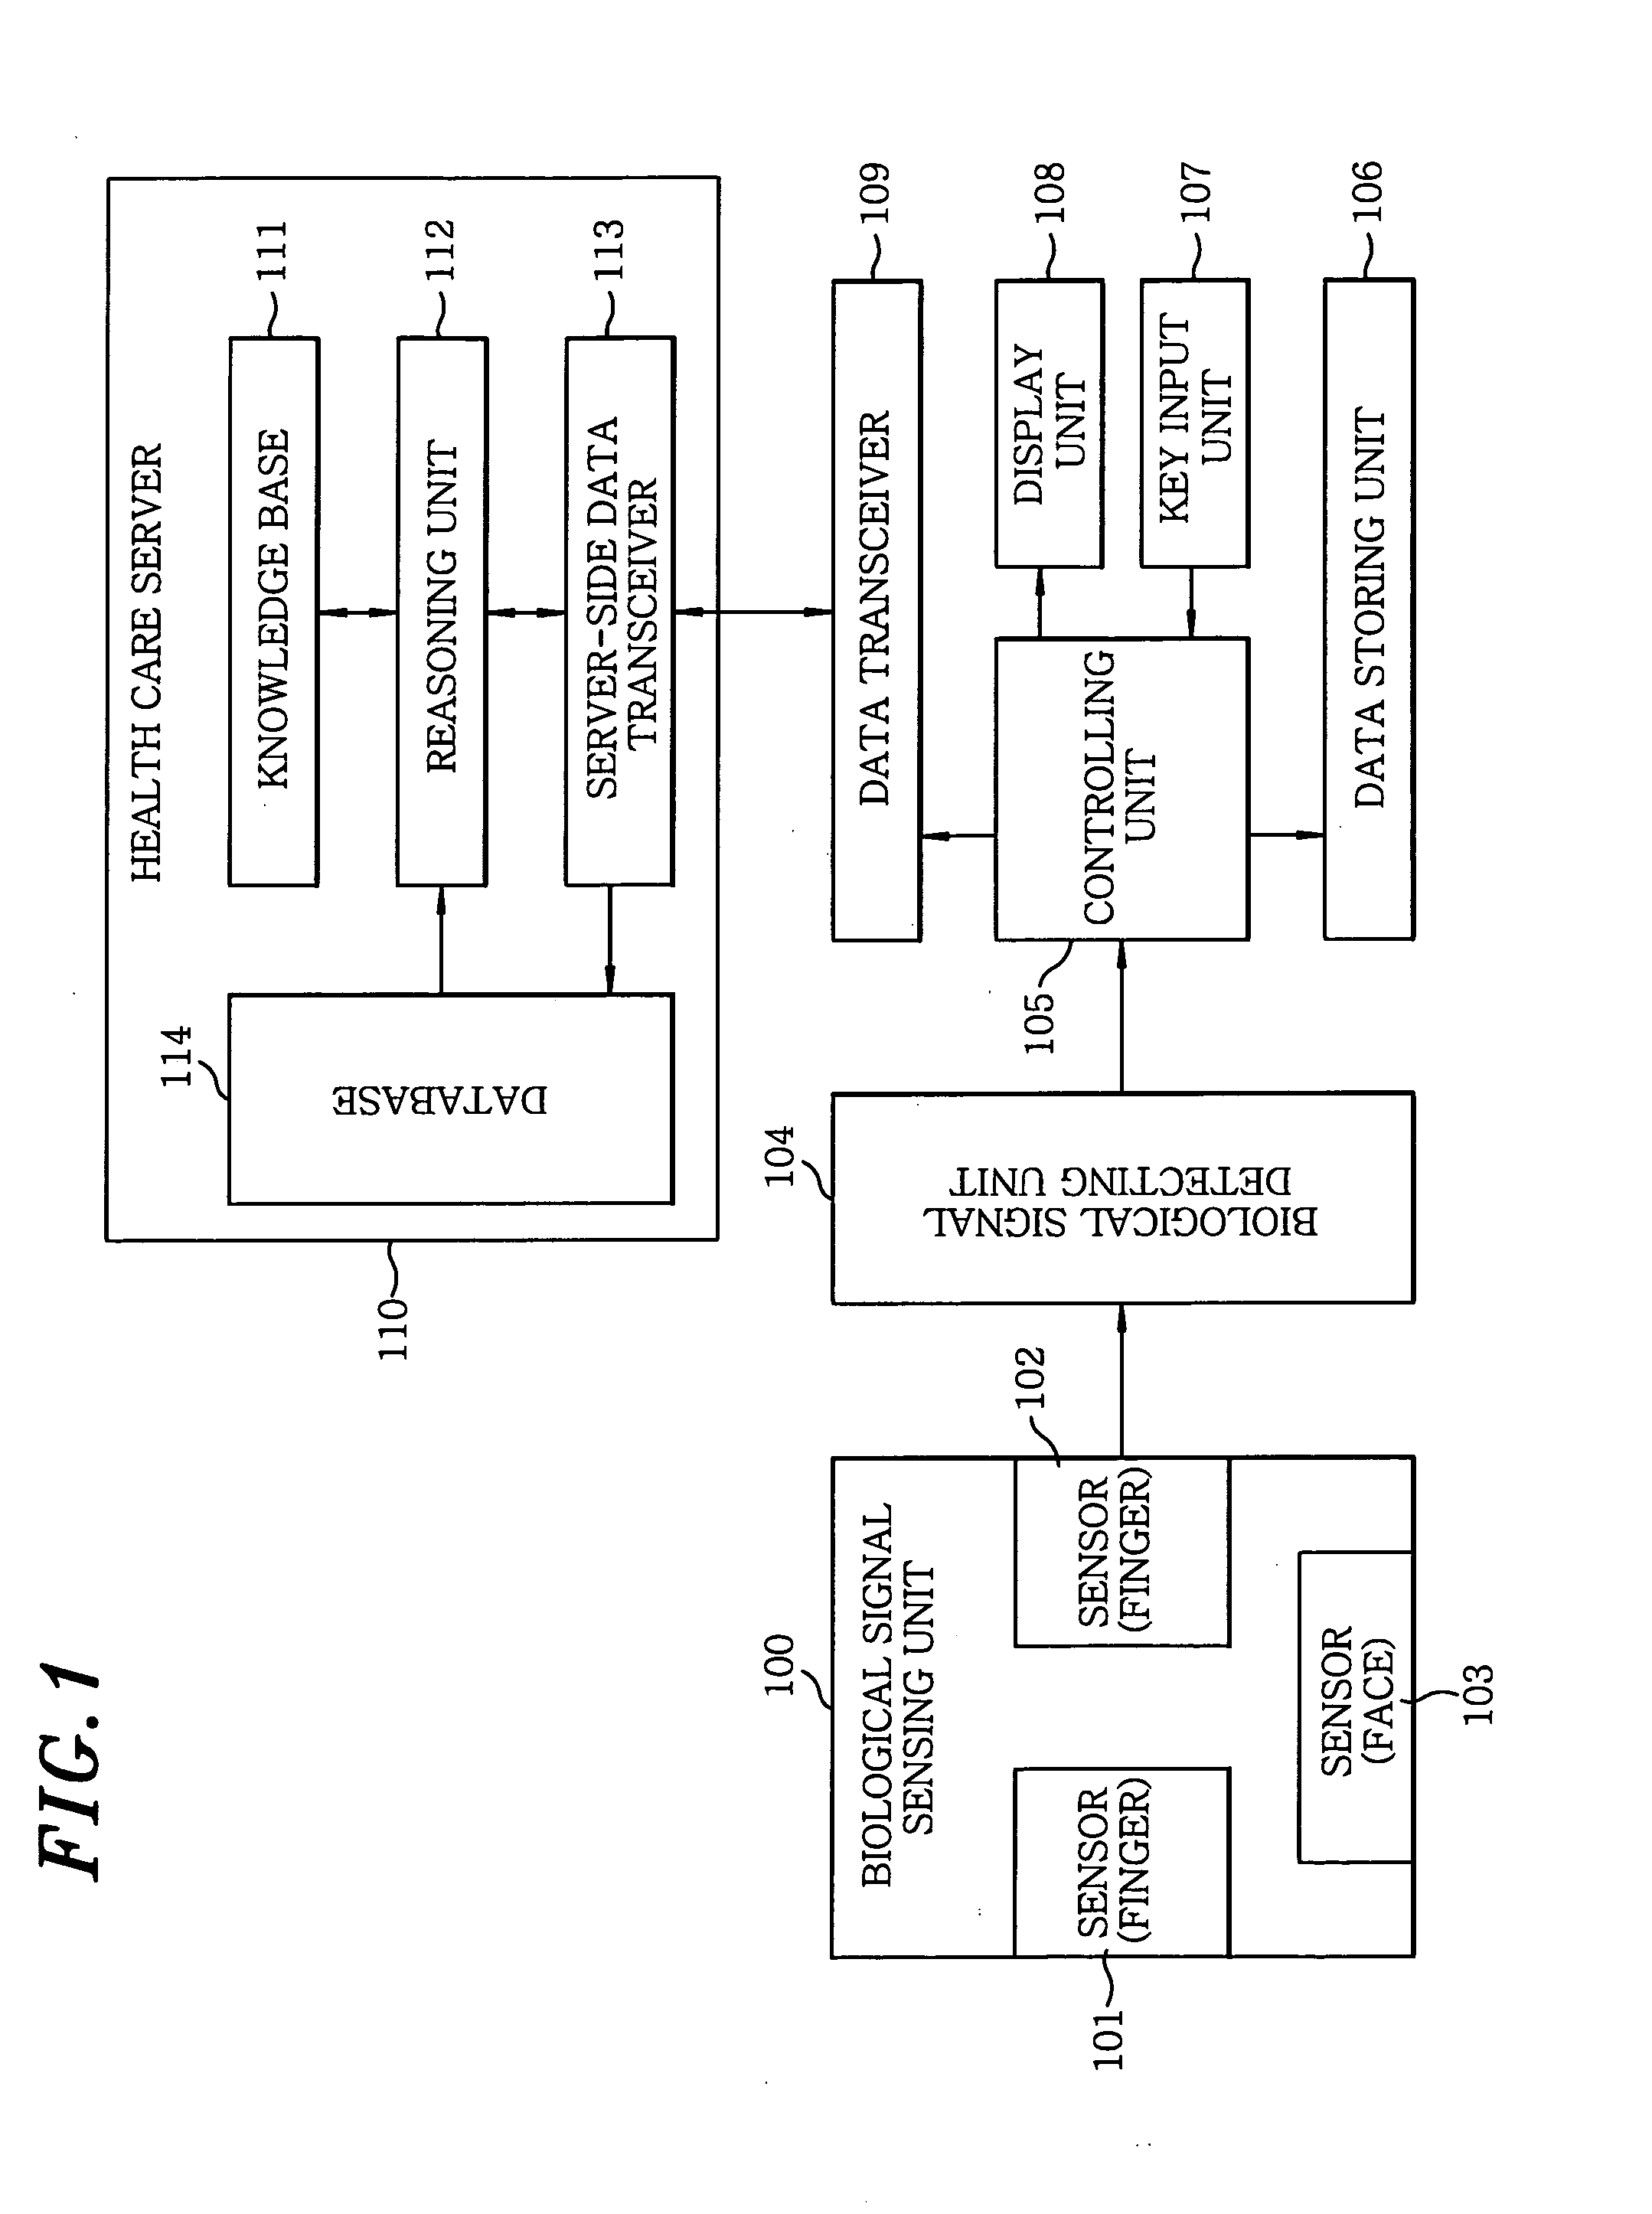 Health management system and method using mobile phone